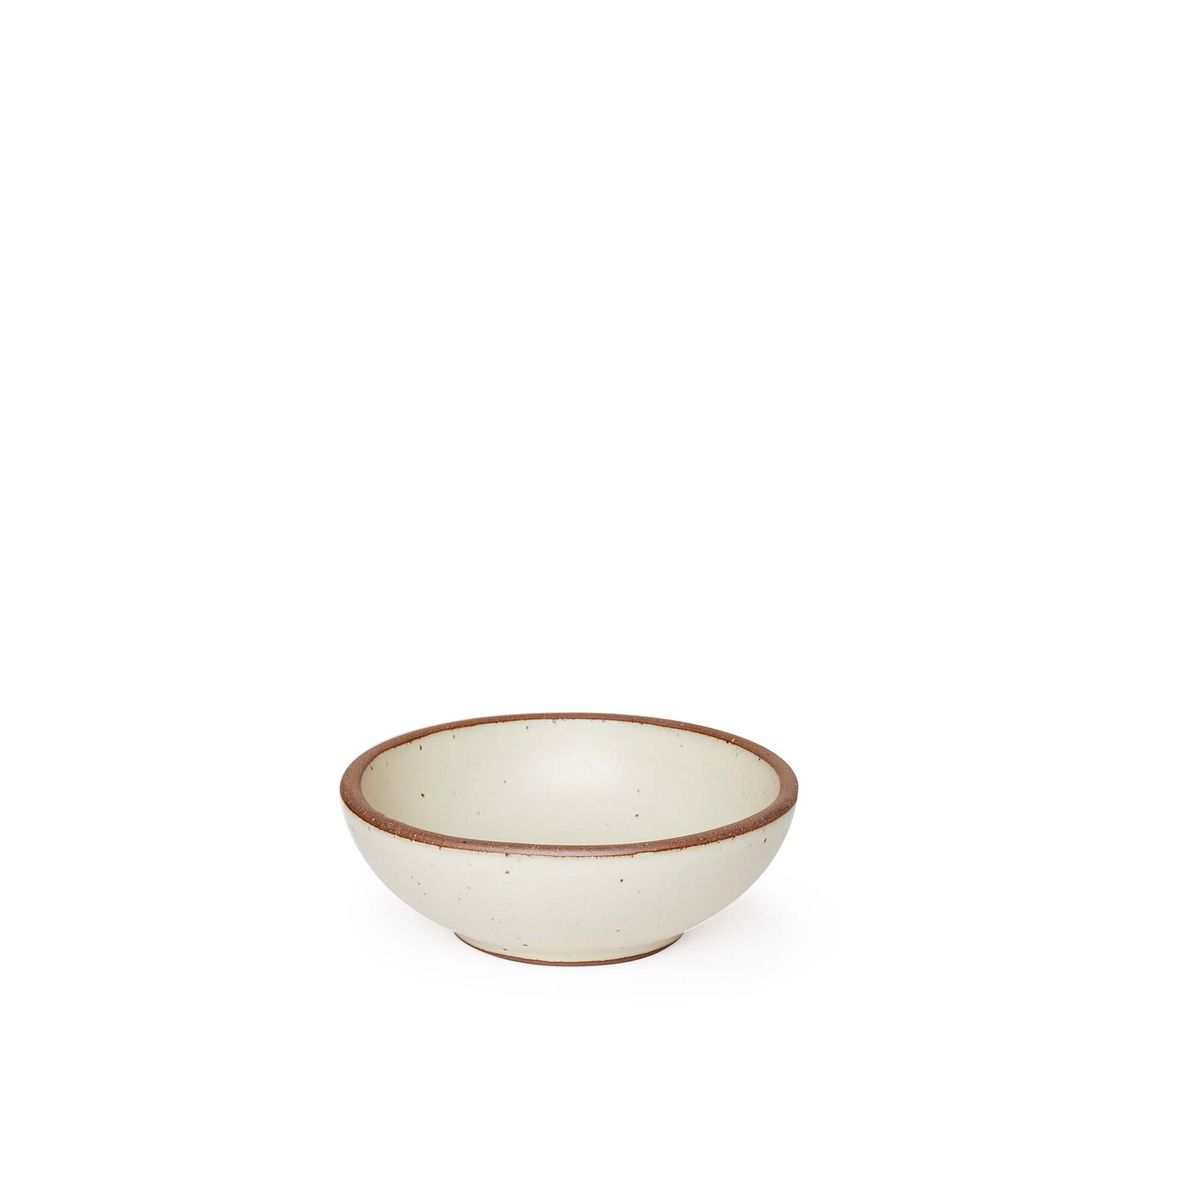 A small shallow ceramic bowl in a warm, tan-toned, off-white color featuring iron speckles and an unglazed rim